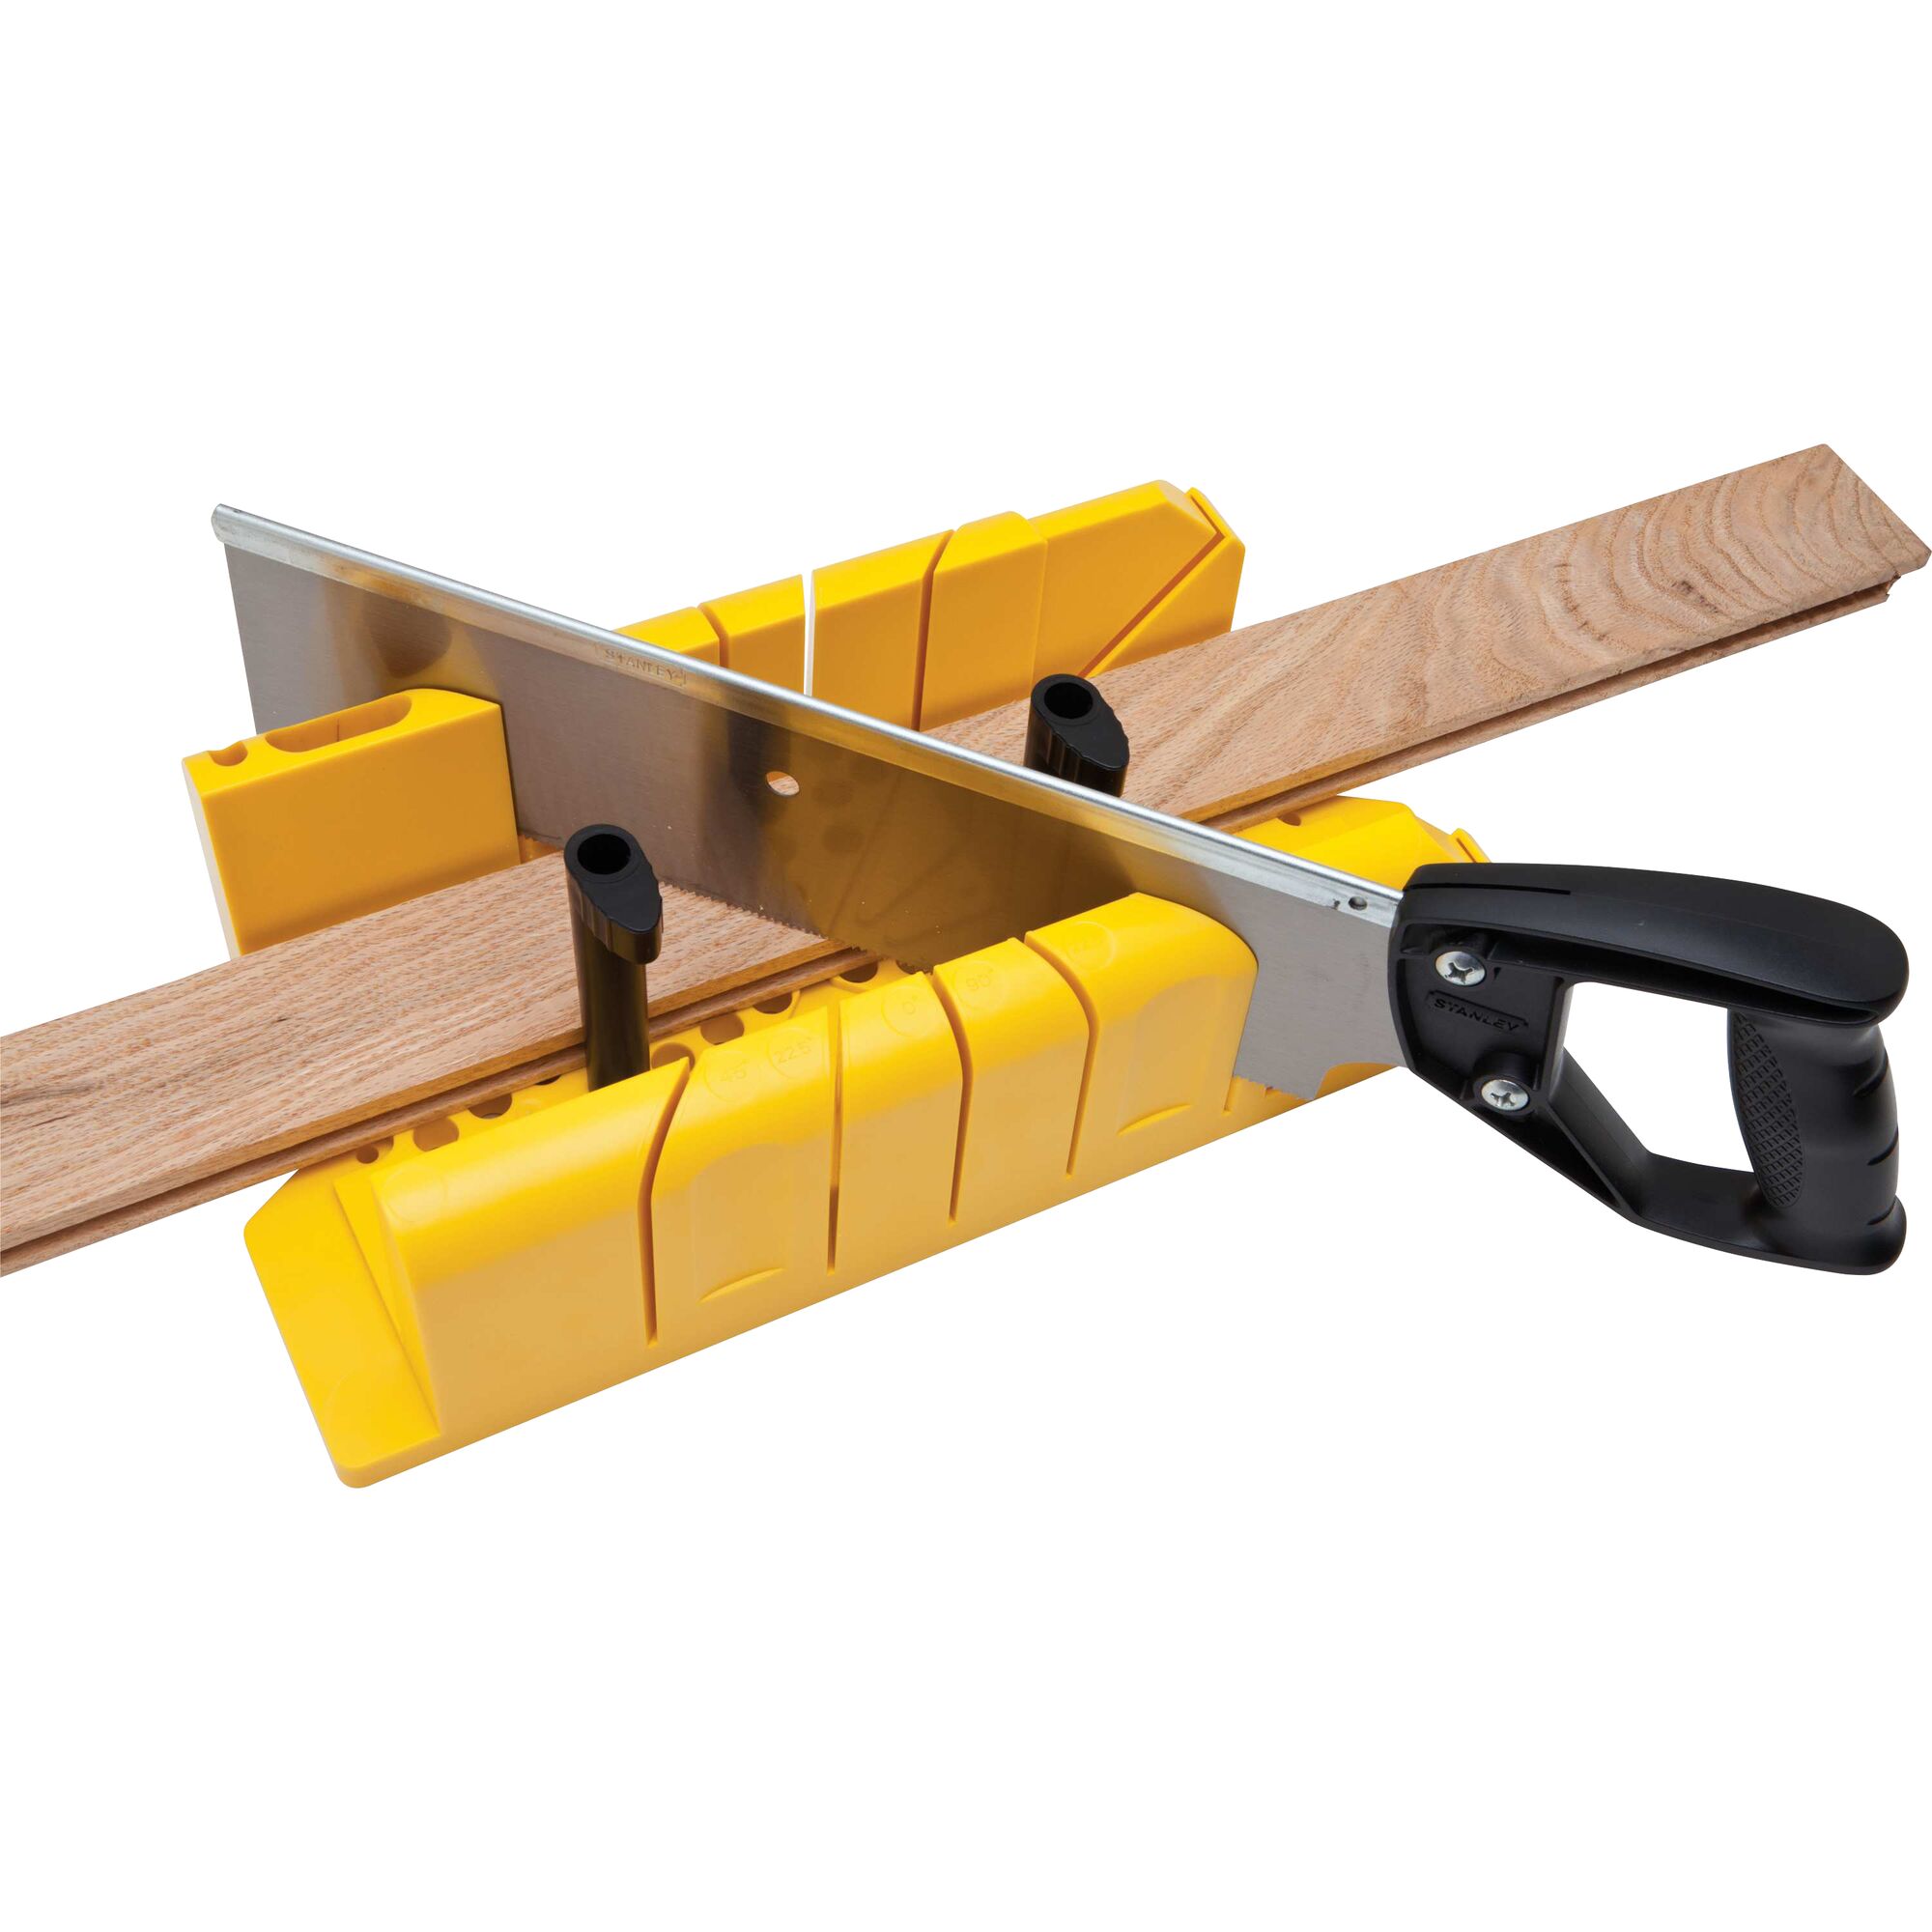 STANLEY Clamping Miter Box With Saw Slip Resistant Grip Hand Tool 